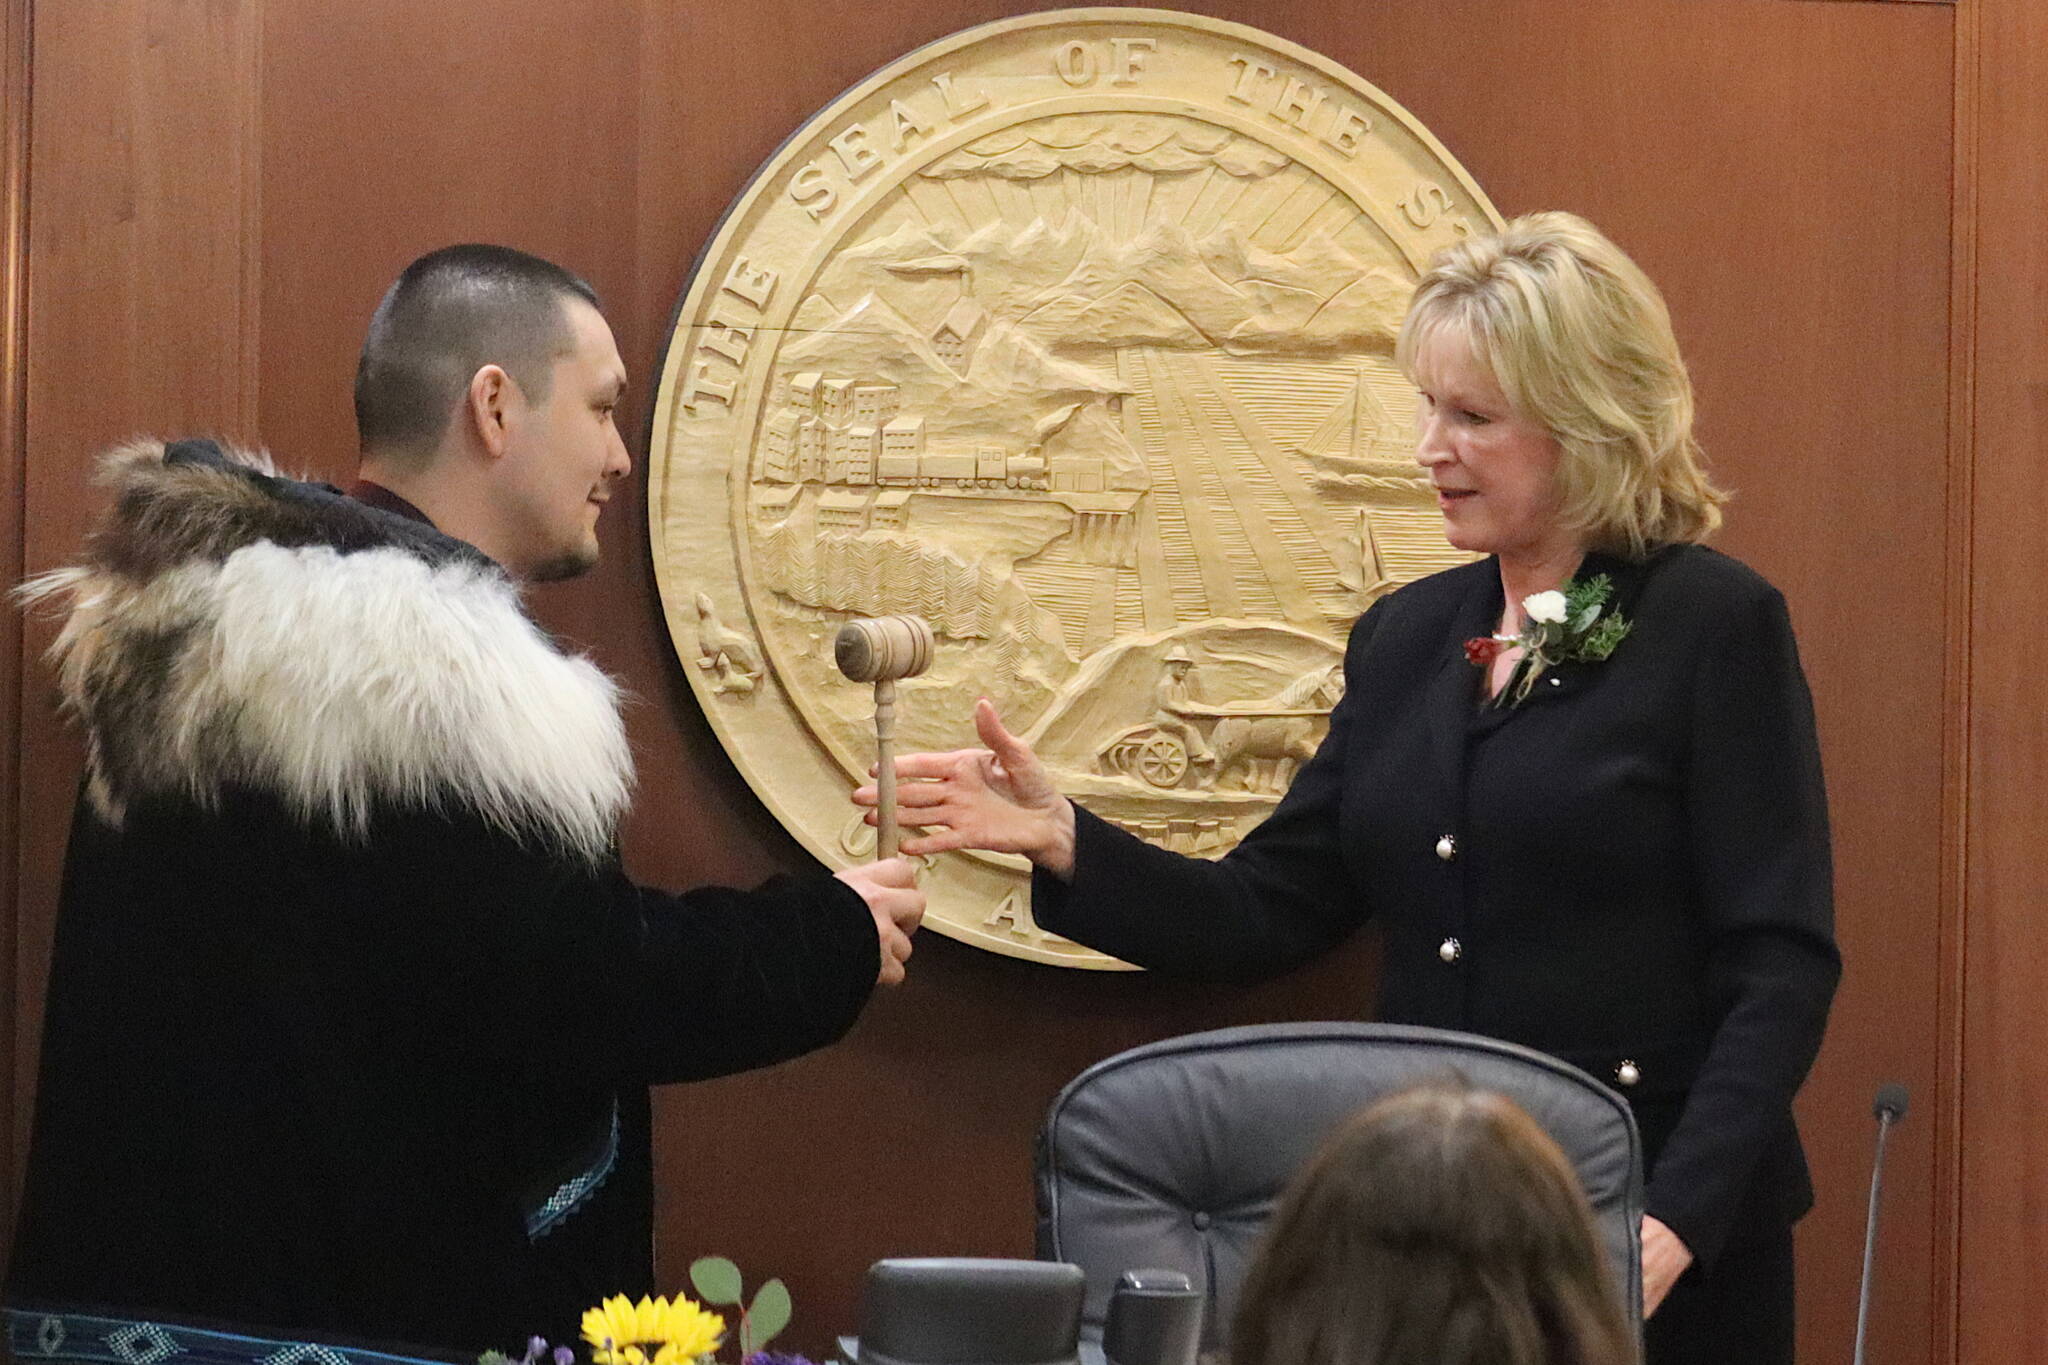 State Rep. Josiah Patkotak, I-Utqiaġvik, left, accepts the gavel from Lt. Gov. Nancy Dahlstrom after being elected speaker pro tem of the House during the opening day of the 33rd Alaska State Legislature on Tuesday. Patkotak, who has served as president pro tem during a previous stalemate in determining a House majority, is among the members Republicans are trying to lure to join a coalition controlled by their party. (Mark Sabbatini / Juneau Empire)